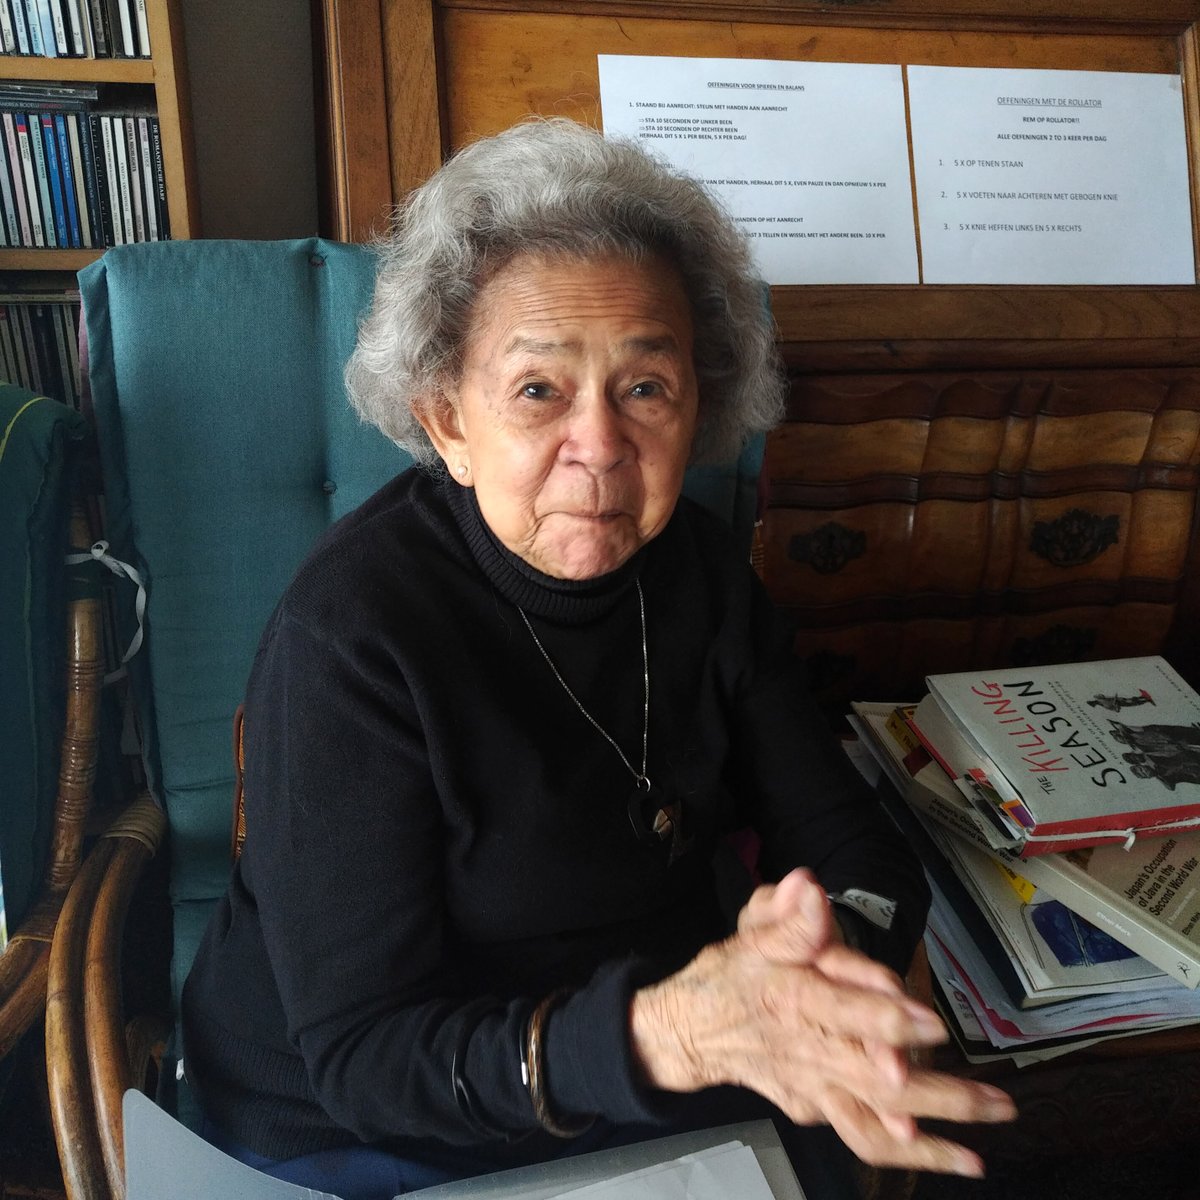 I caught up with Francisca on the phone. She's doing well in lockdown in Amsterdam, and glad to see 1965 discussed again. She told me that, when talking about my book, I must always put the events in the larger context of Western colonial exploitation of the Third World. She's 94